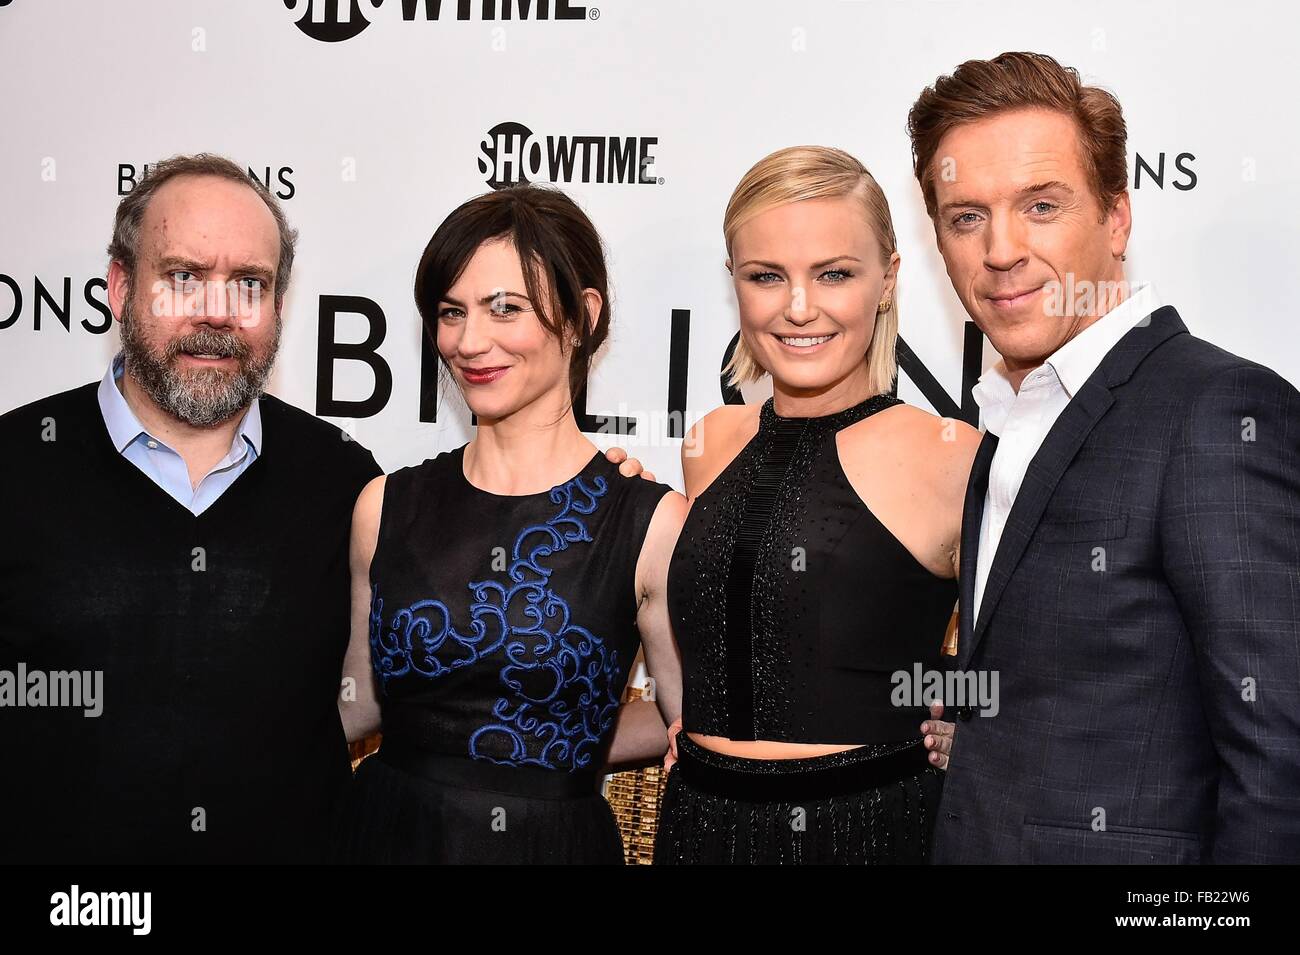 New York, NY, USA. 7th Jan, 2016. Paul Giamatti, Maggie Siff, Malin Akerman, Damian Lewis at arrivals for BILLIONS Showtime Series Premiere, Museum of Modern Art (MoMA), New York, NY January 7, 2016. Credit:  Steven Ferdman/Everett Collection/Alamy Live News Stock Photo